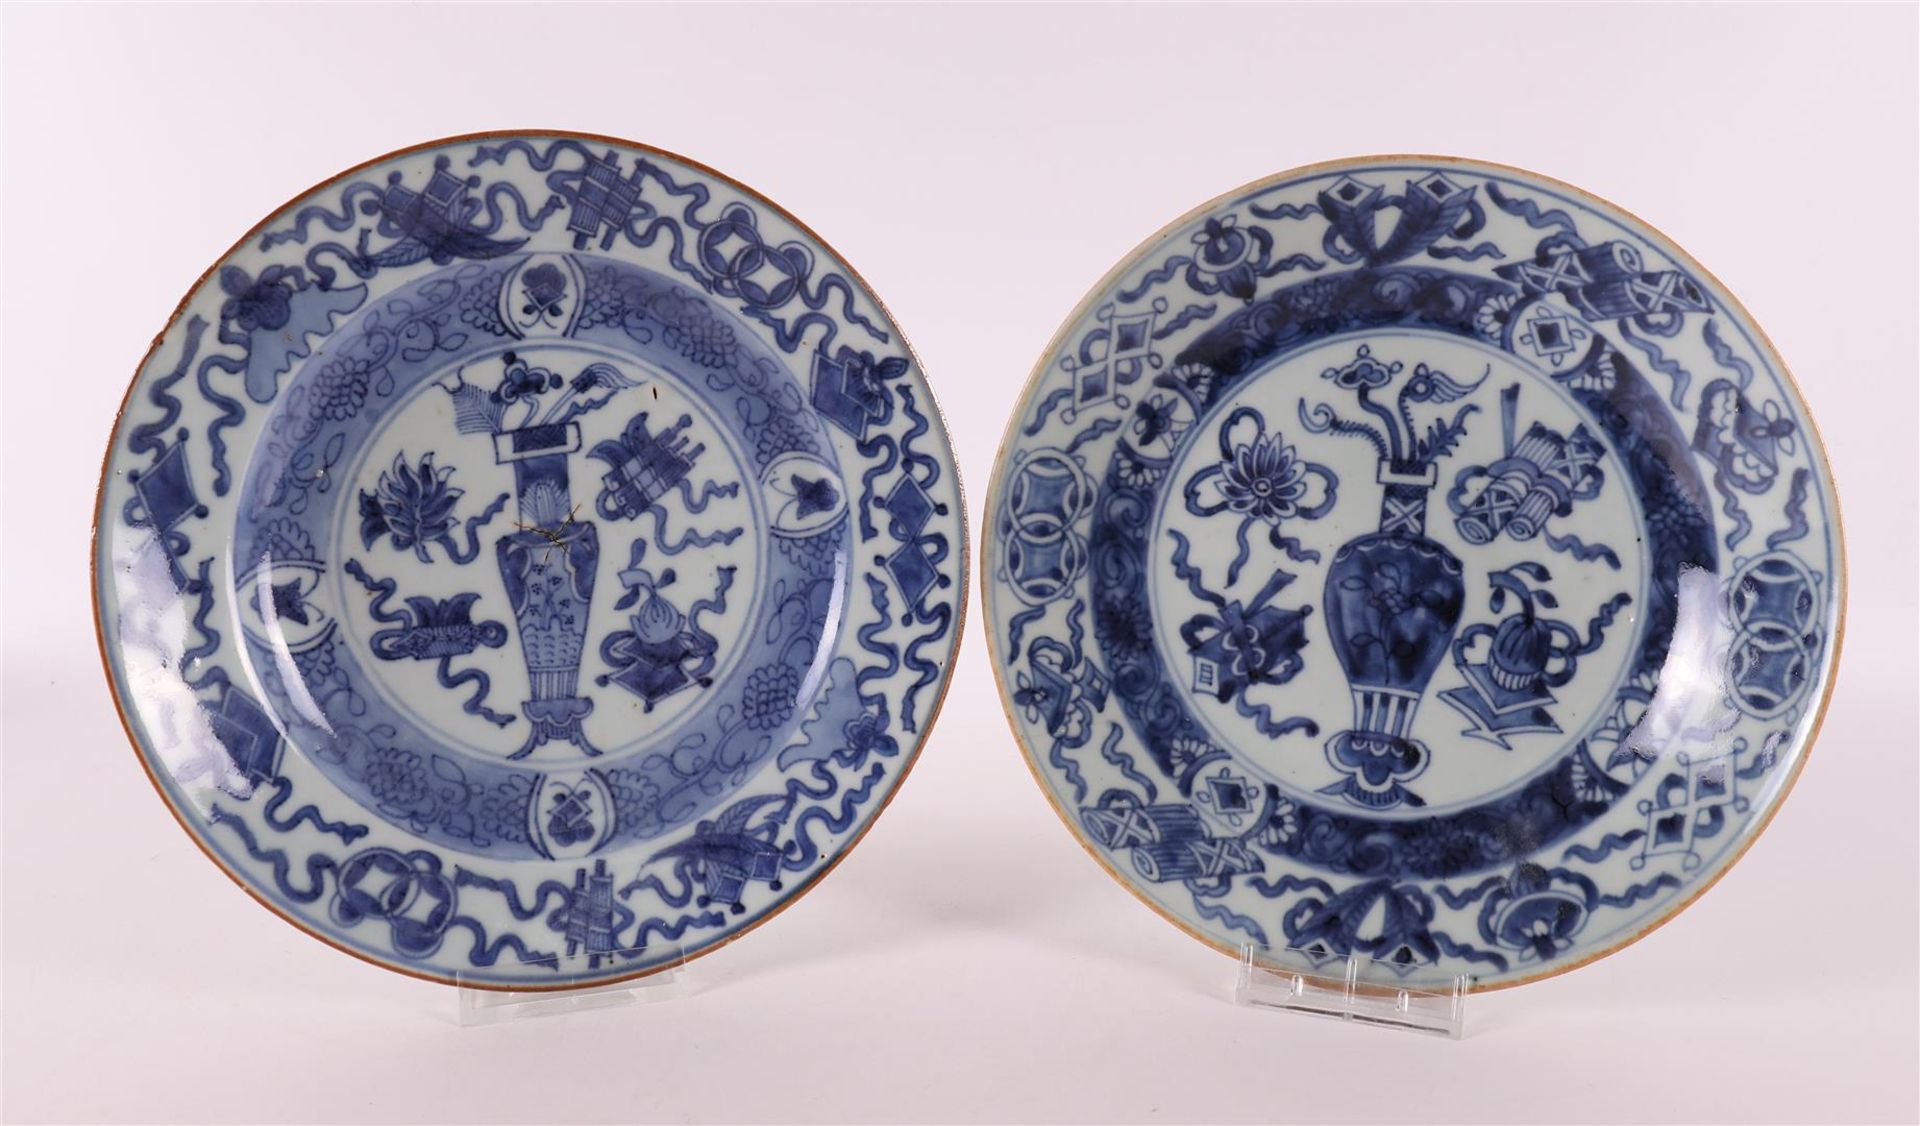 A pair of blue/white porcelain dishes with capucine rim, China, Qianlong